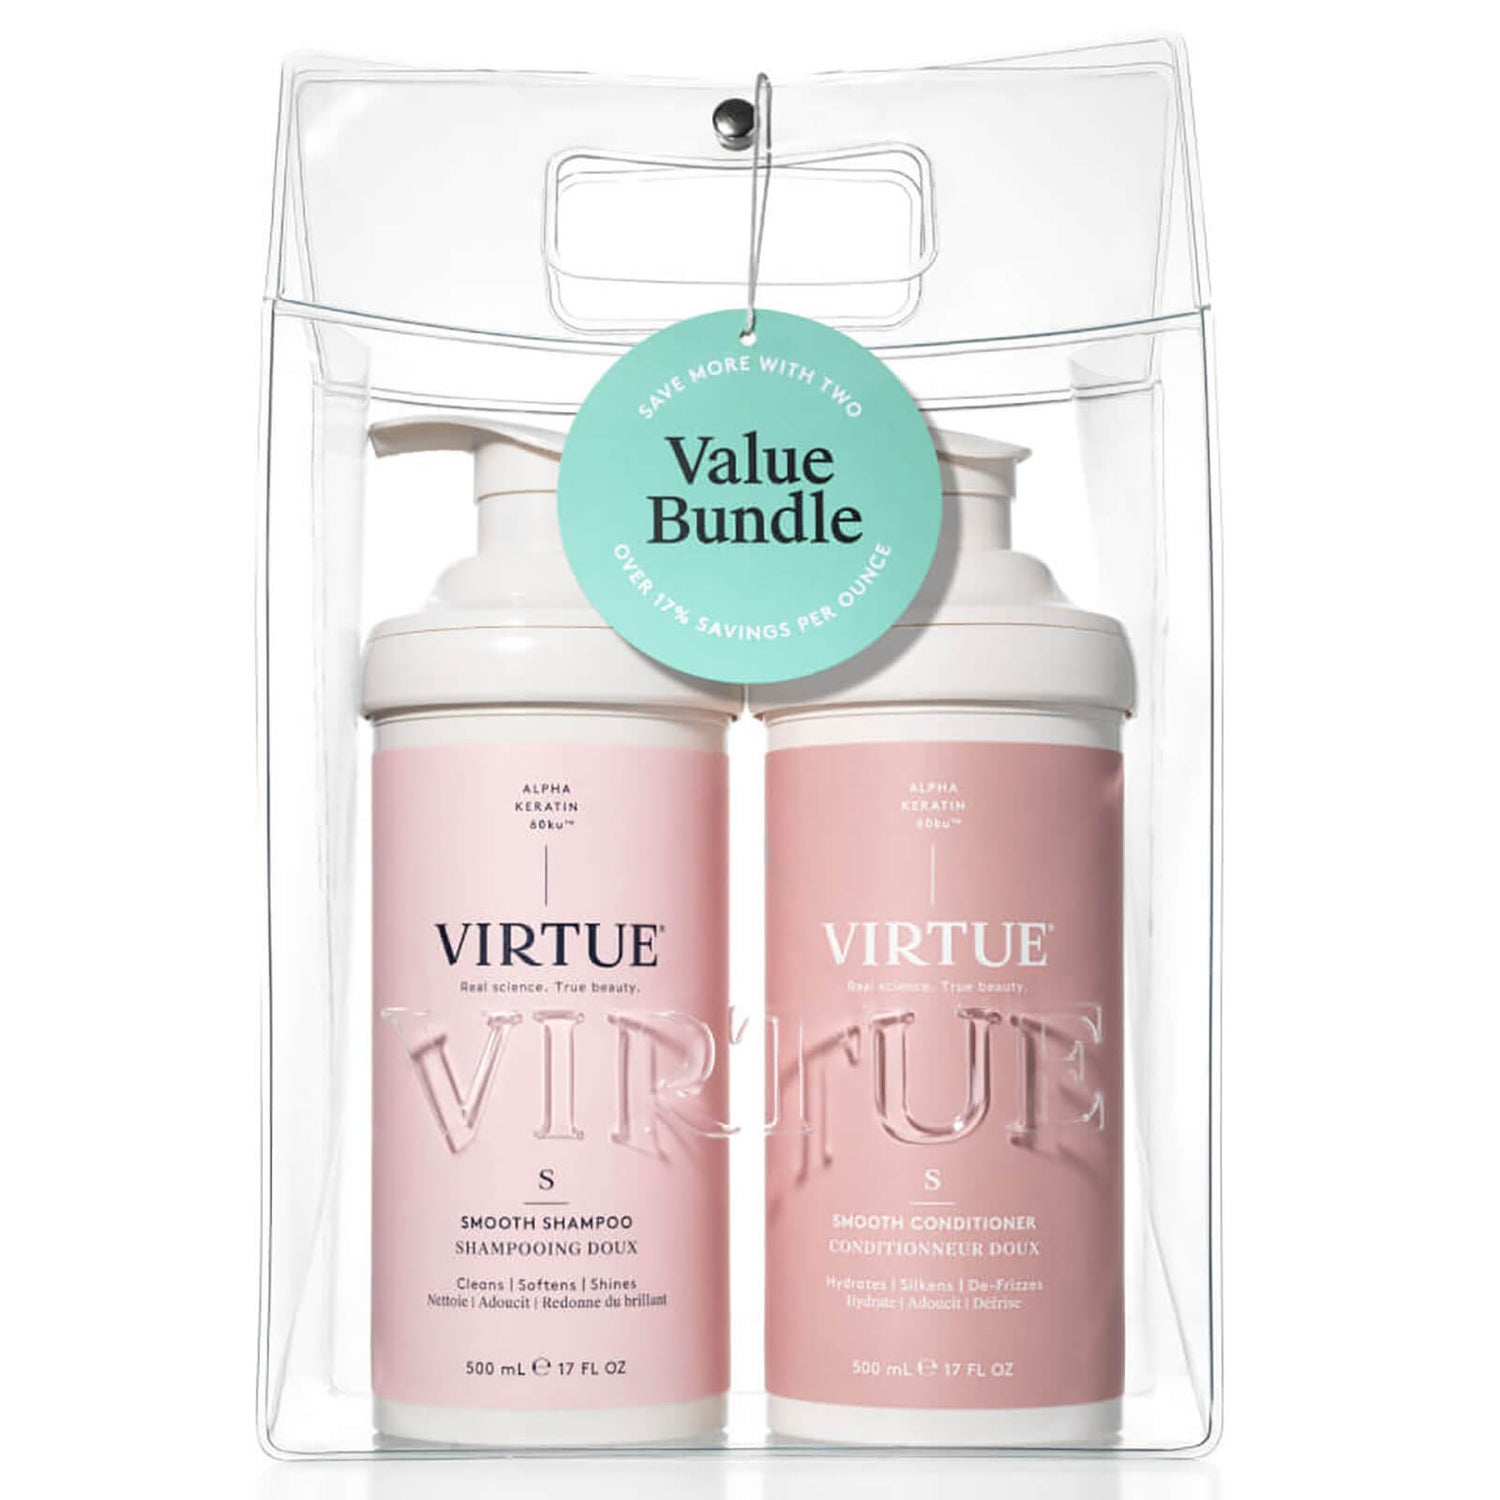 VIRTUE Smooth Professional Shampoo and Conditioner Duo